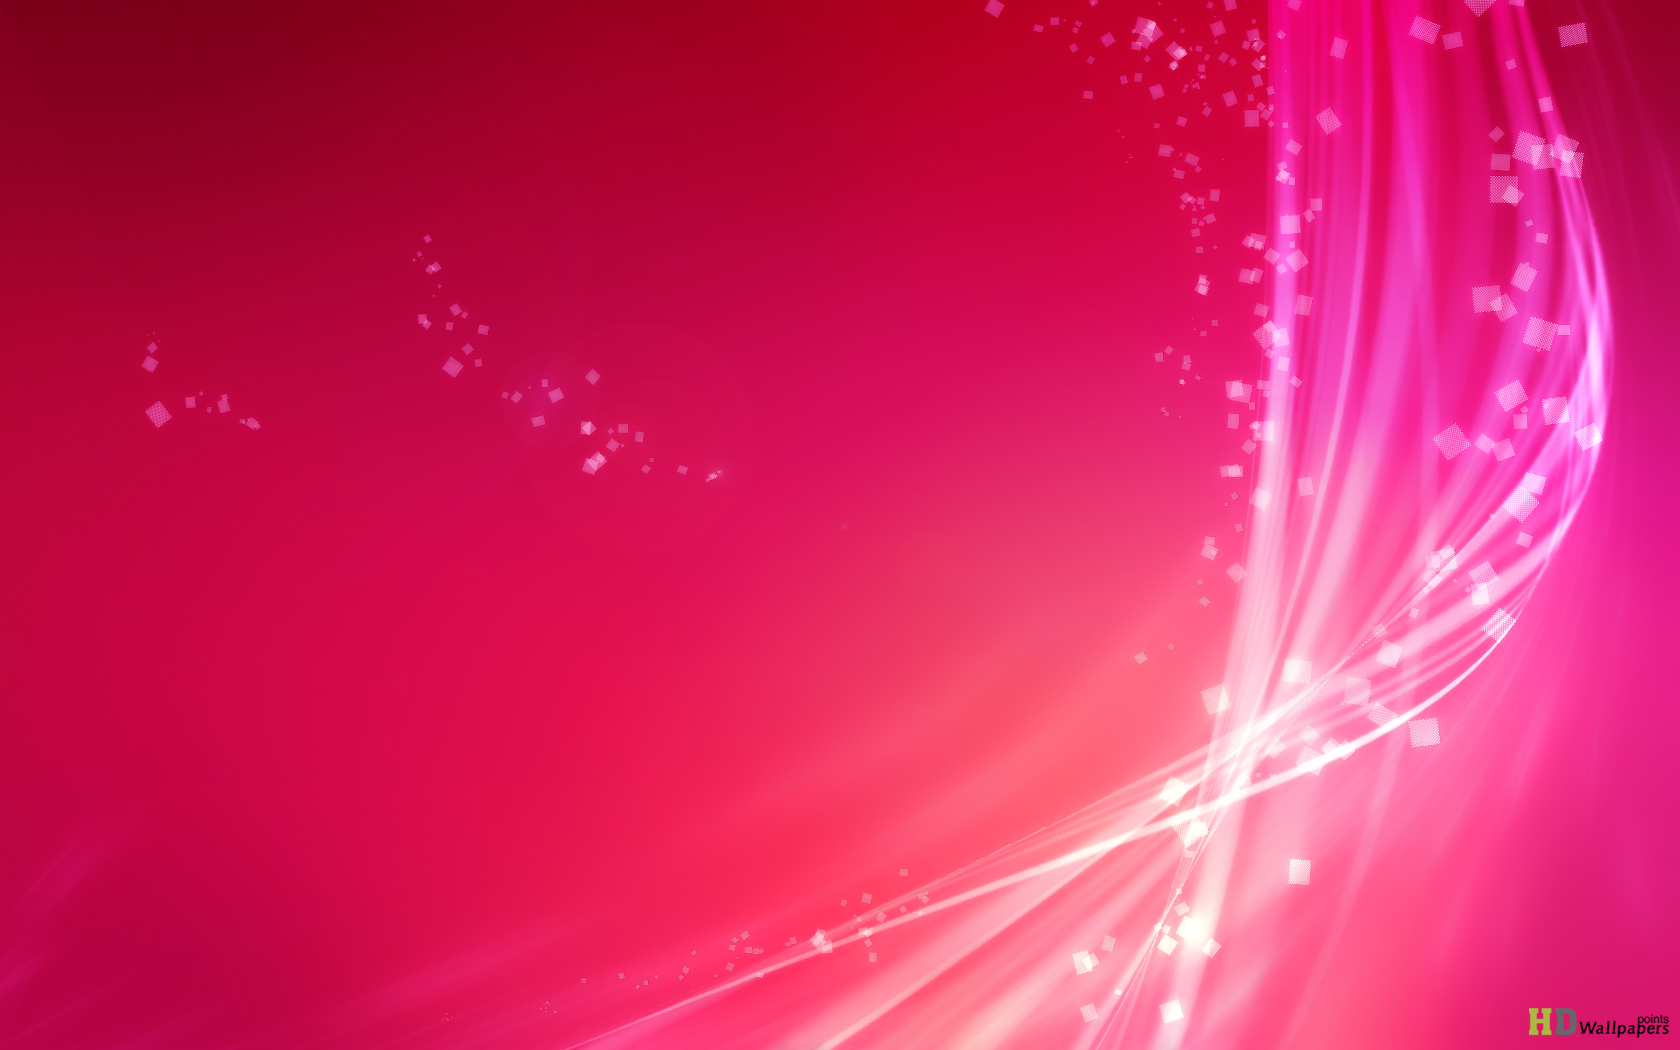 15 Pink Backgrounds Free PSD EPS JPEG PNG Format